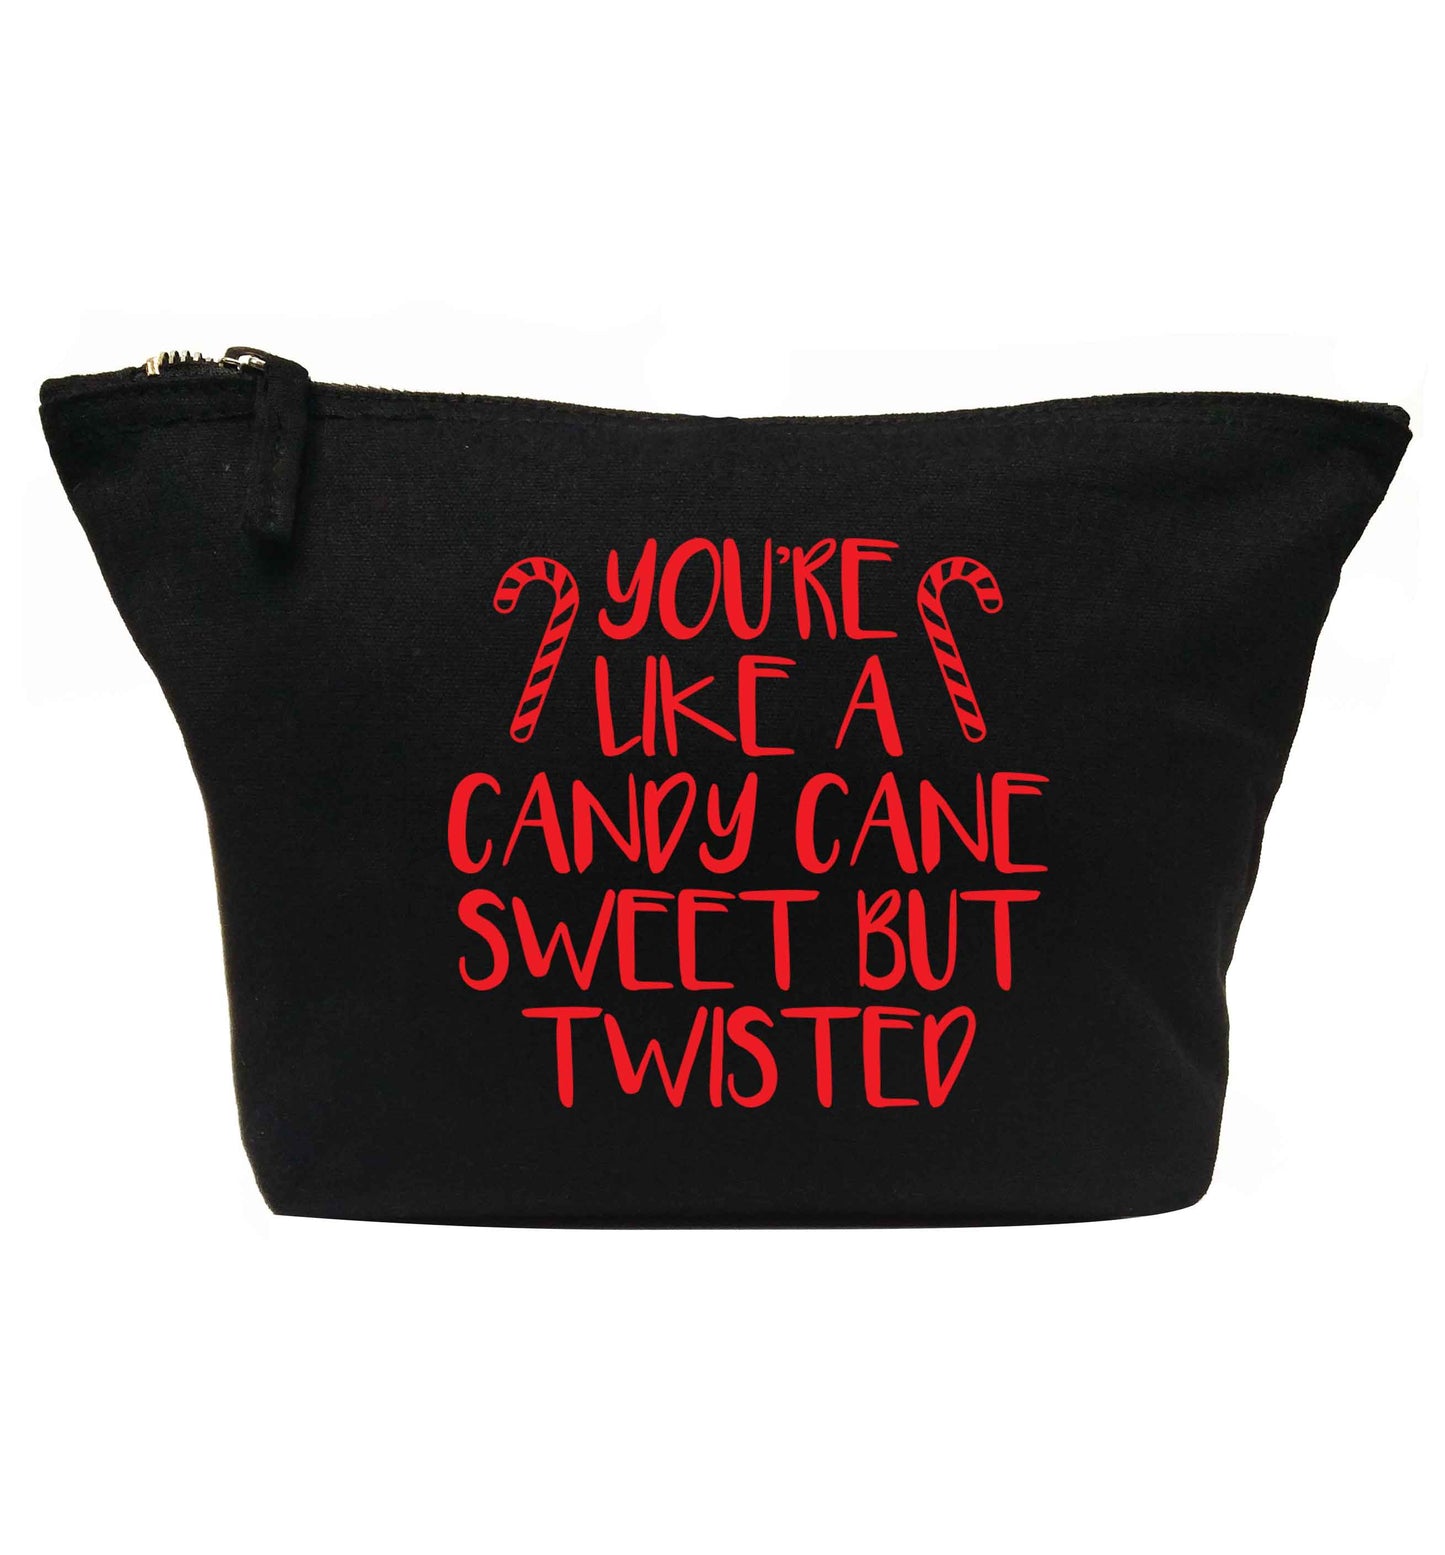 You're like a candy cane sweet but twisted | makeup / wash bag